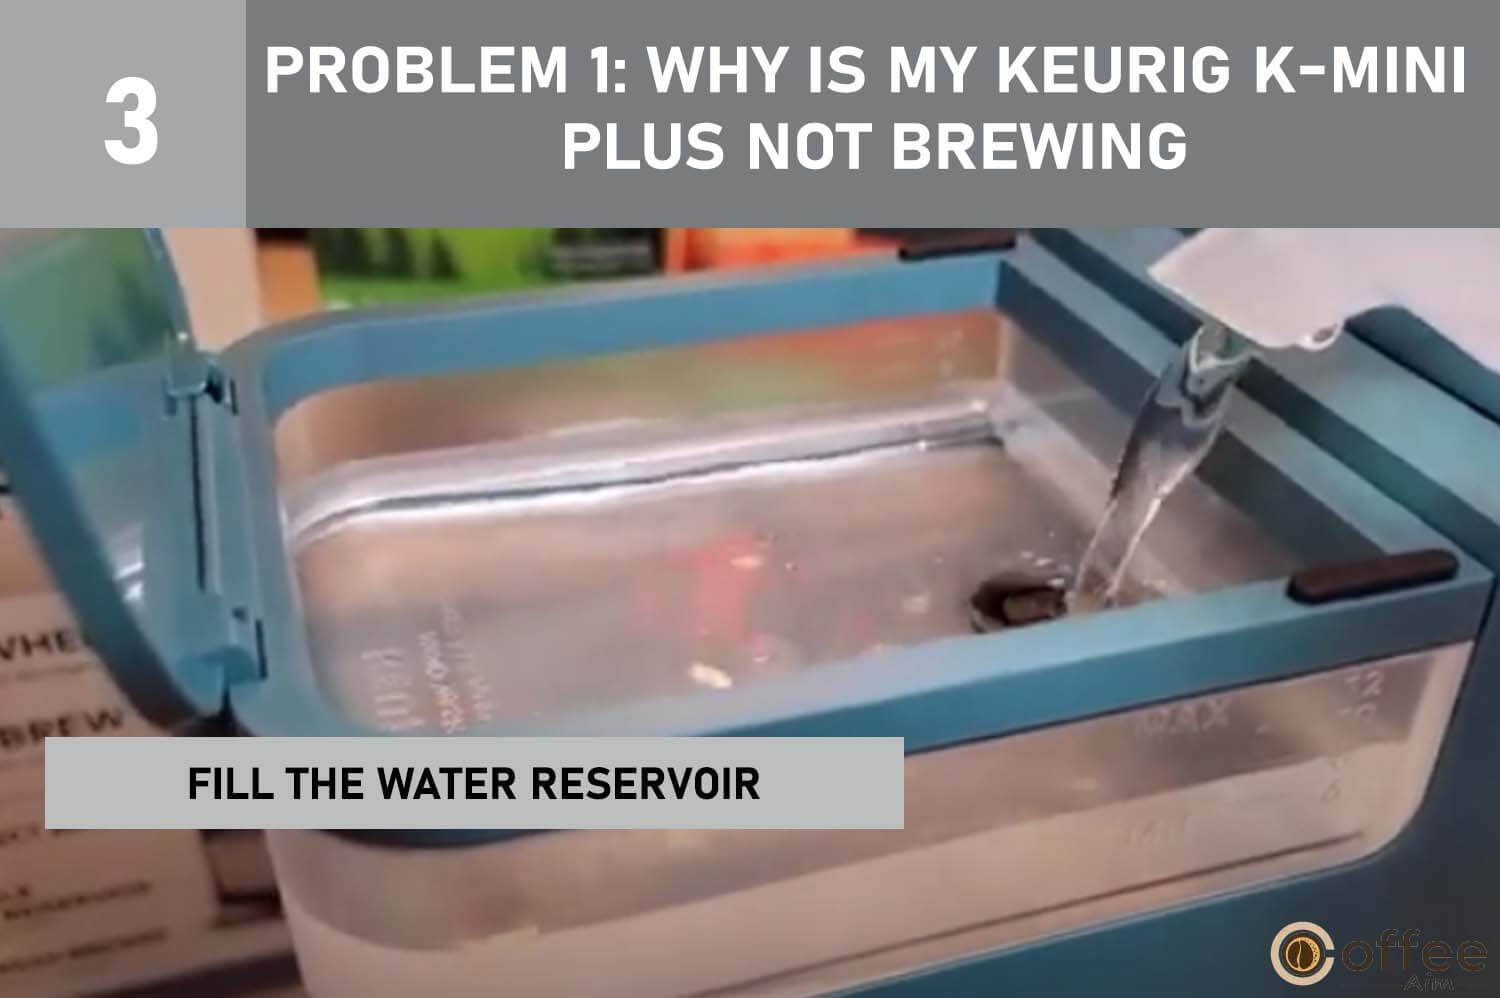 This image provides instructions on "Filling the Water Reservoir" as part of Problem 1: "Why Is My Keurig K-Mini Plus Not Brewing?" in our article "Keurig K-Mini Plus Problems."